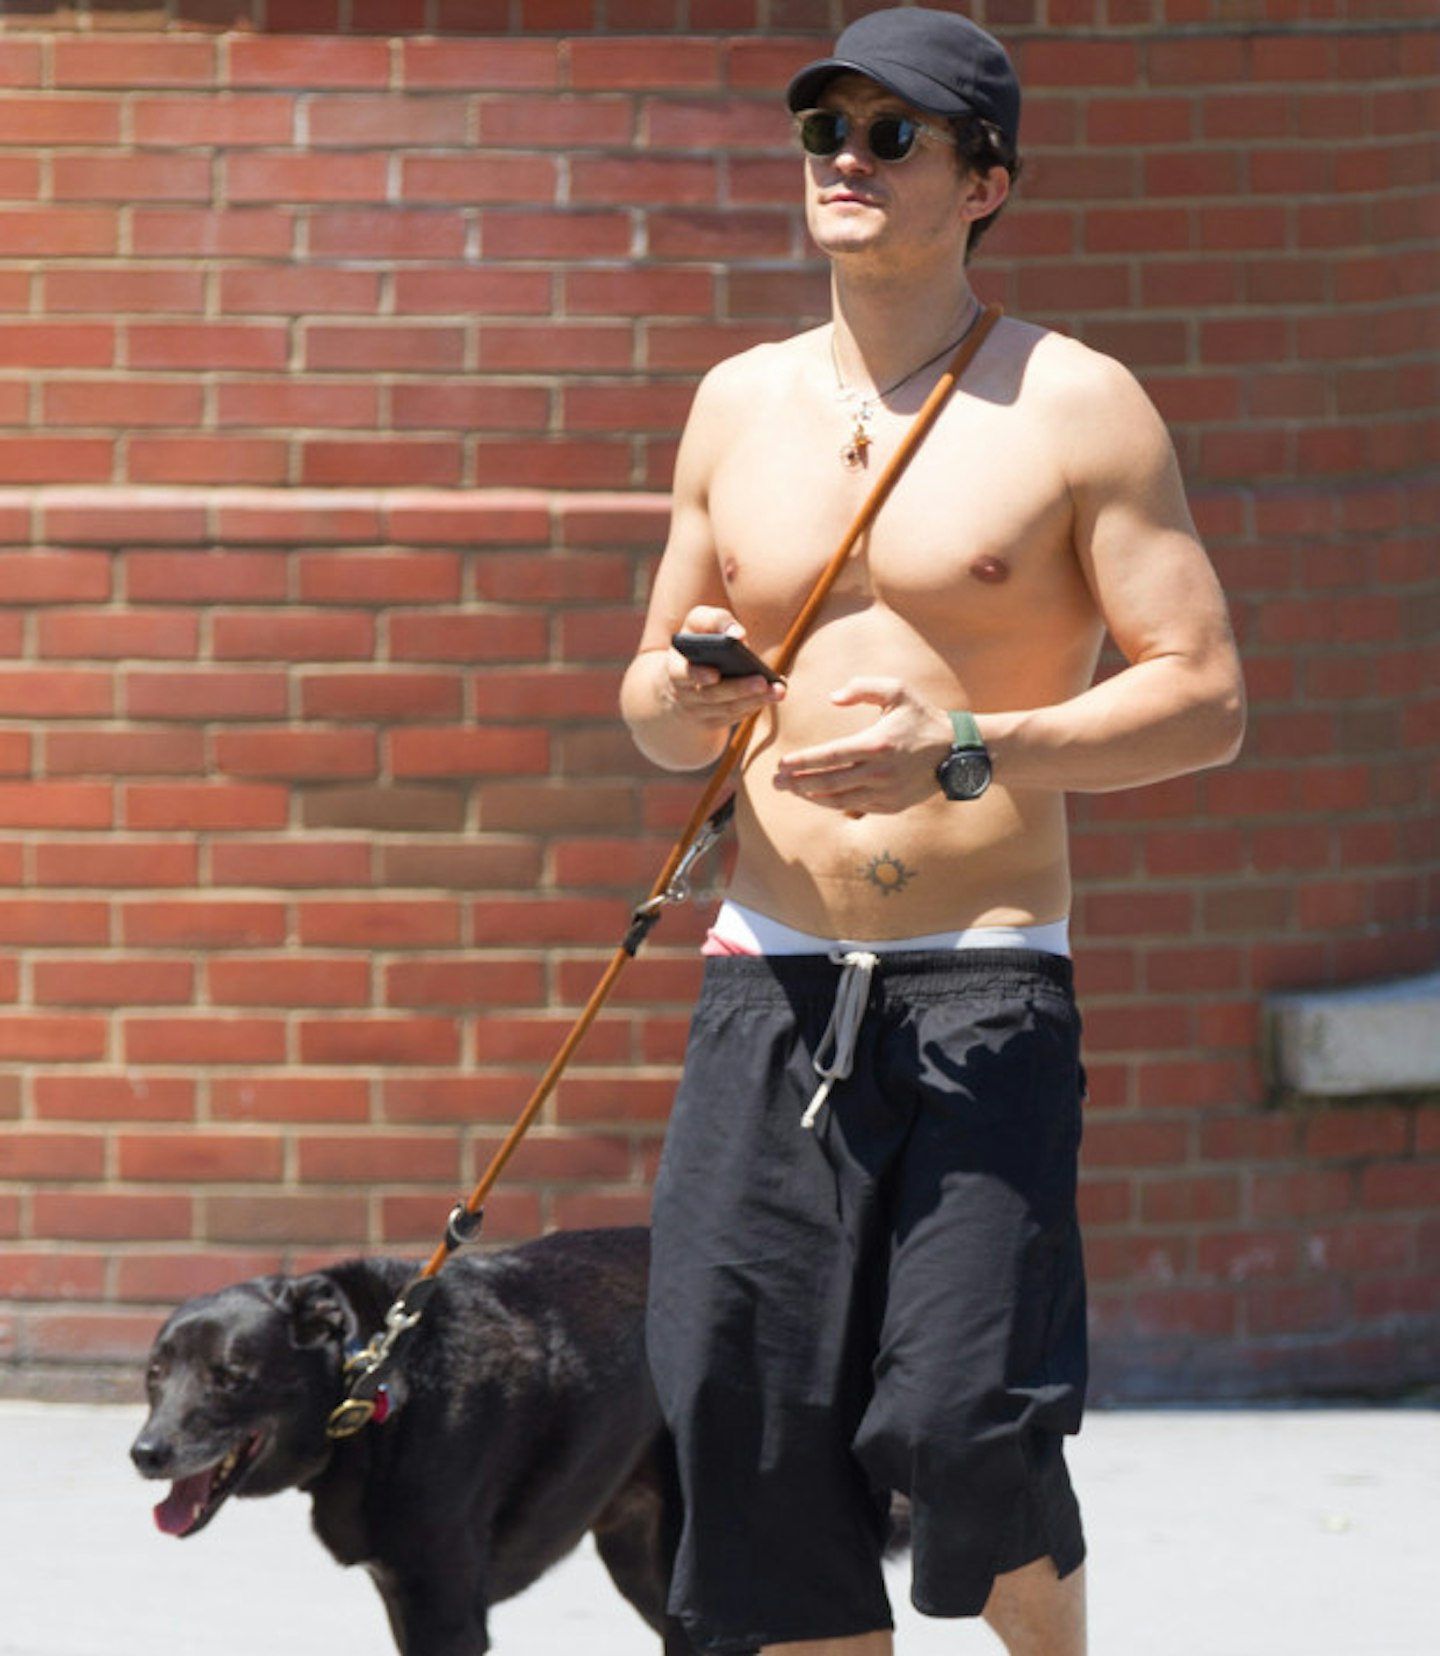 Orlando Bloom looking HOT with his pooch pal